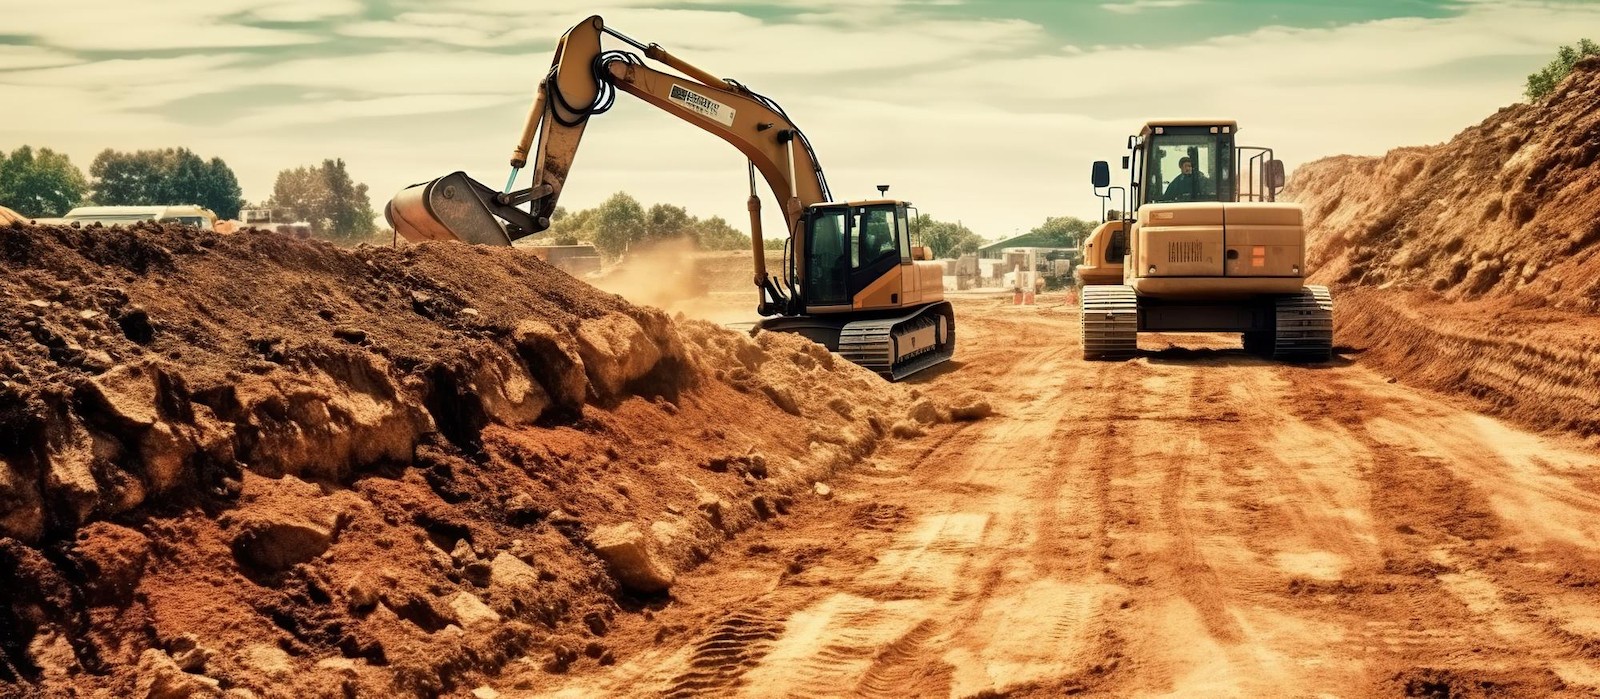 Exclusive Hydraulics & Engineering's heavy-duty earthmoving machinery in action, featuring excavators, bulldozers, and loaders.